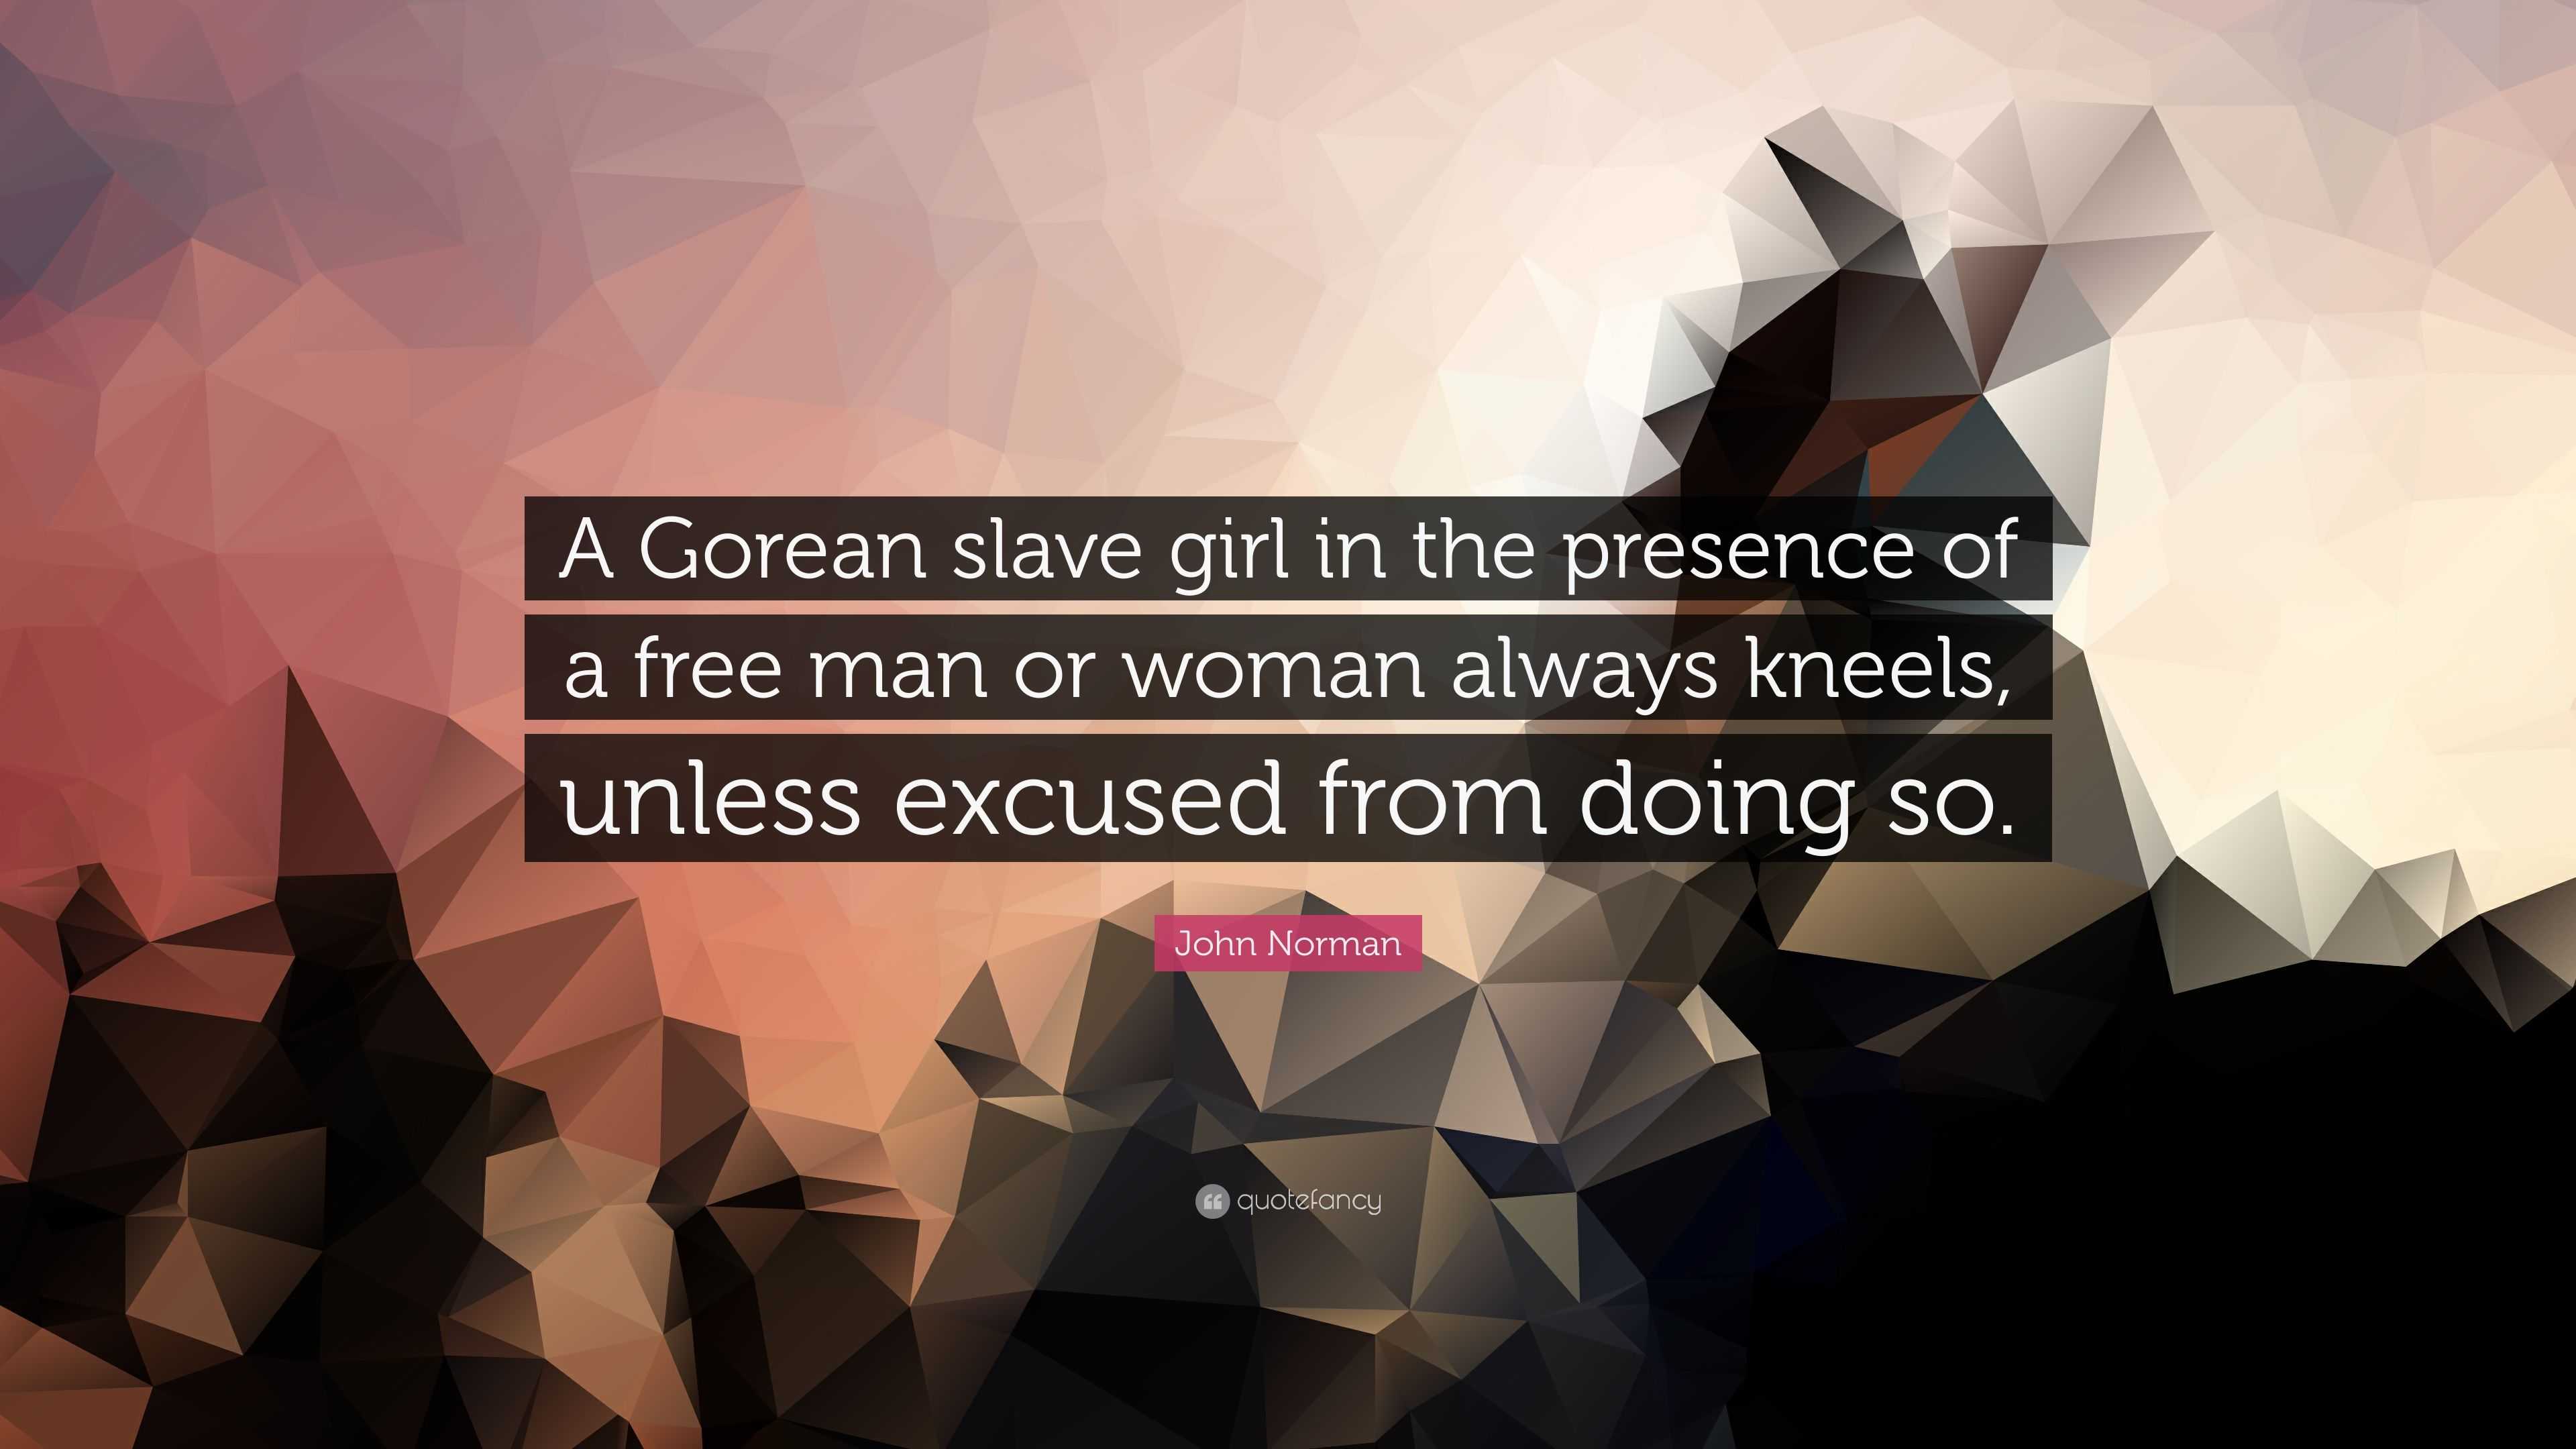 John Norman Quote: "A Gorean slave girl in the presence of a free man or woman always kneels ...